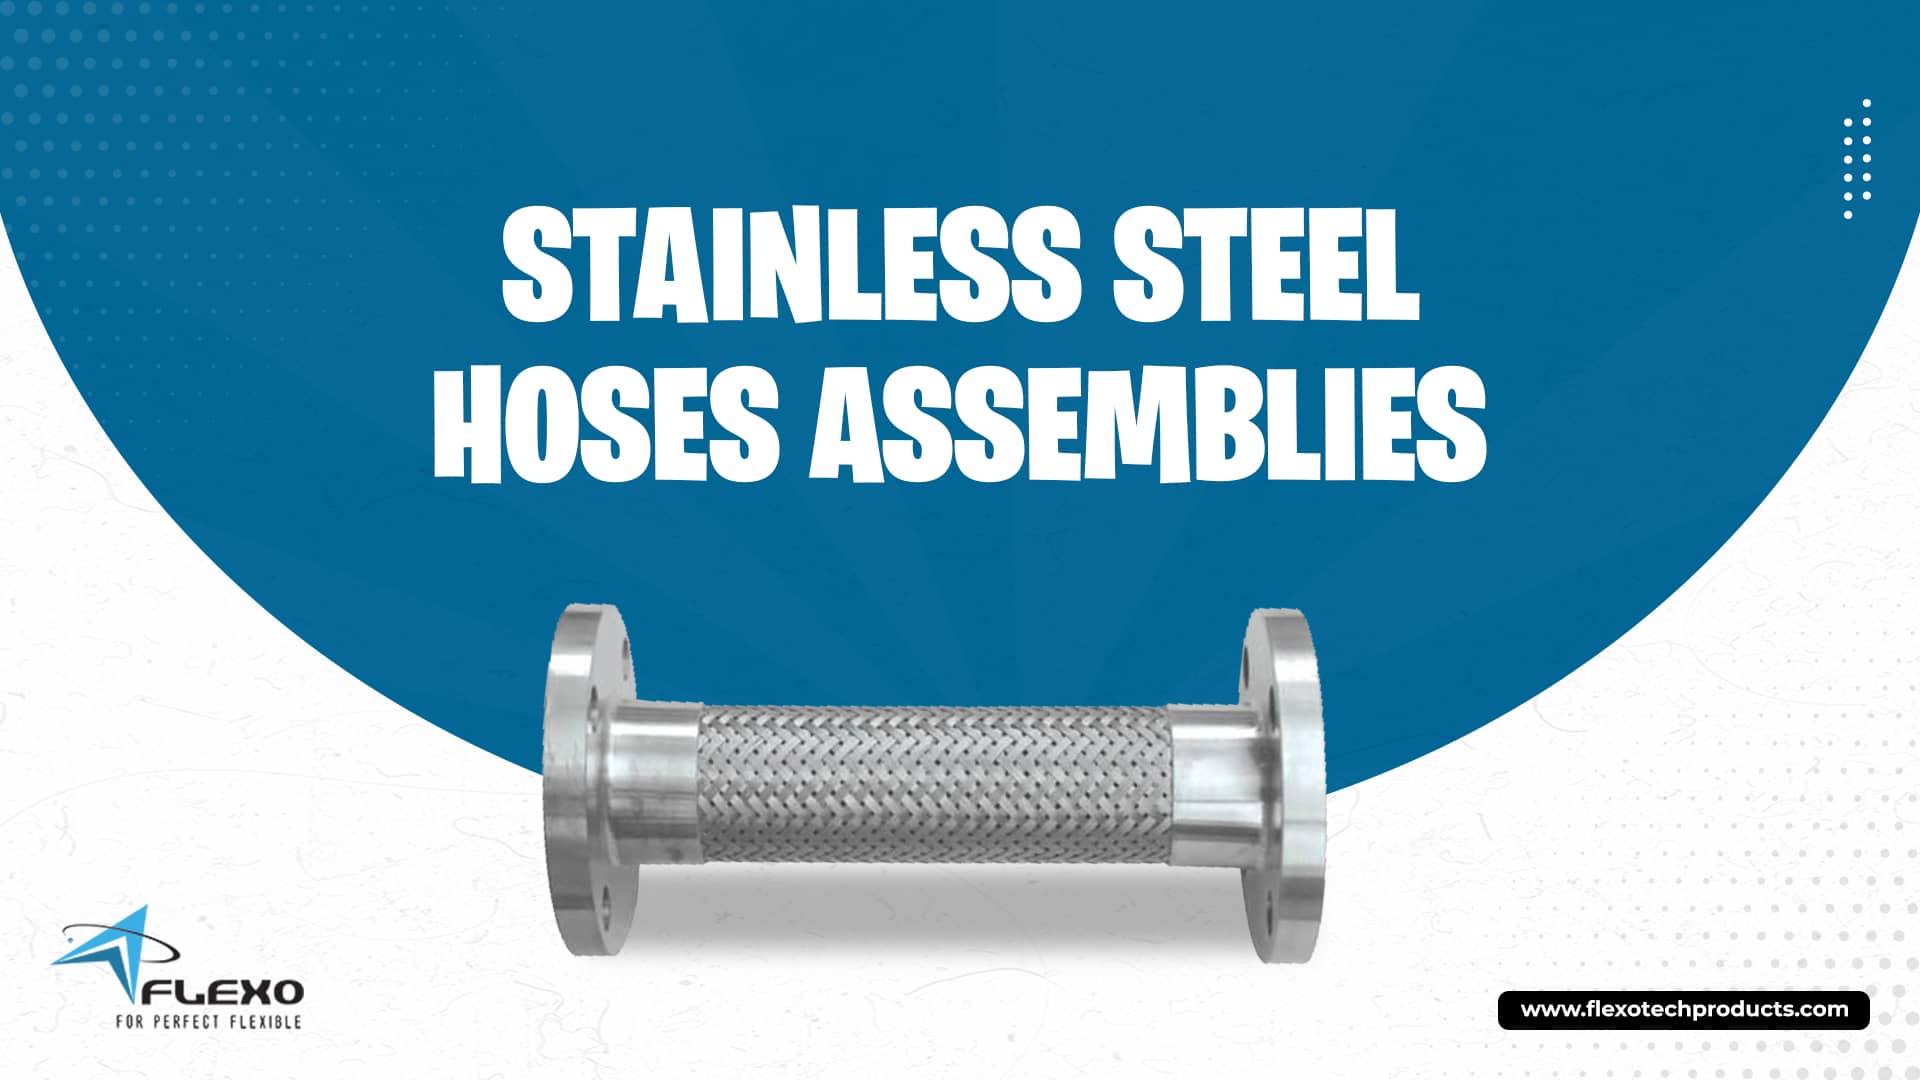 Stainless steel hoses assemblies